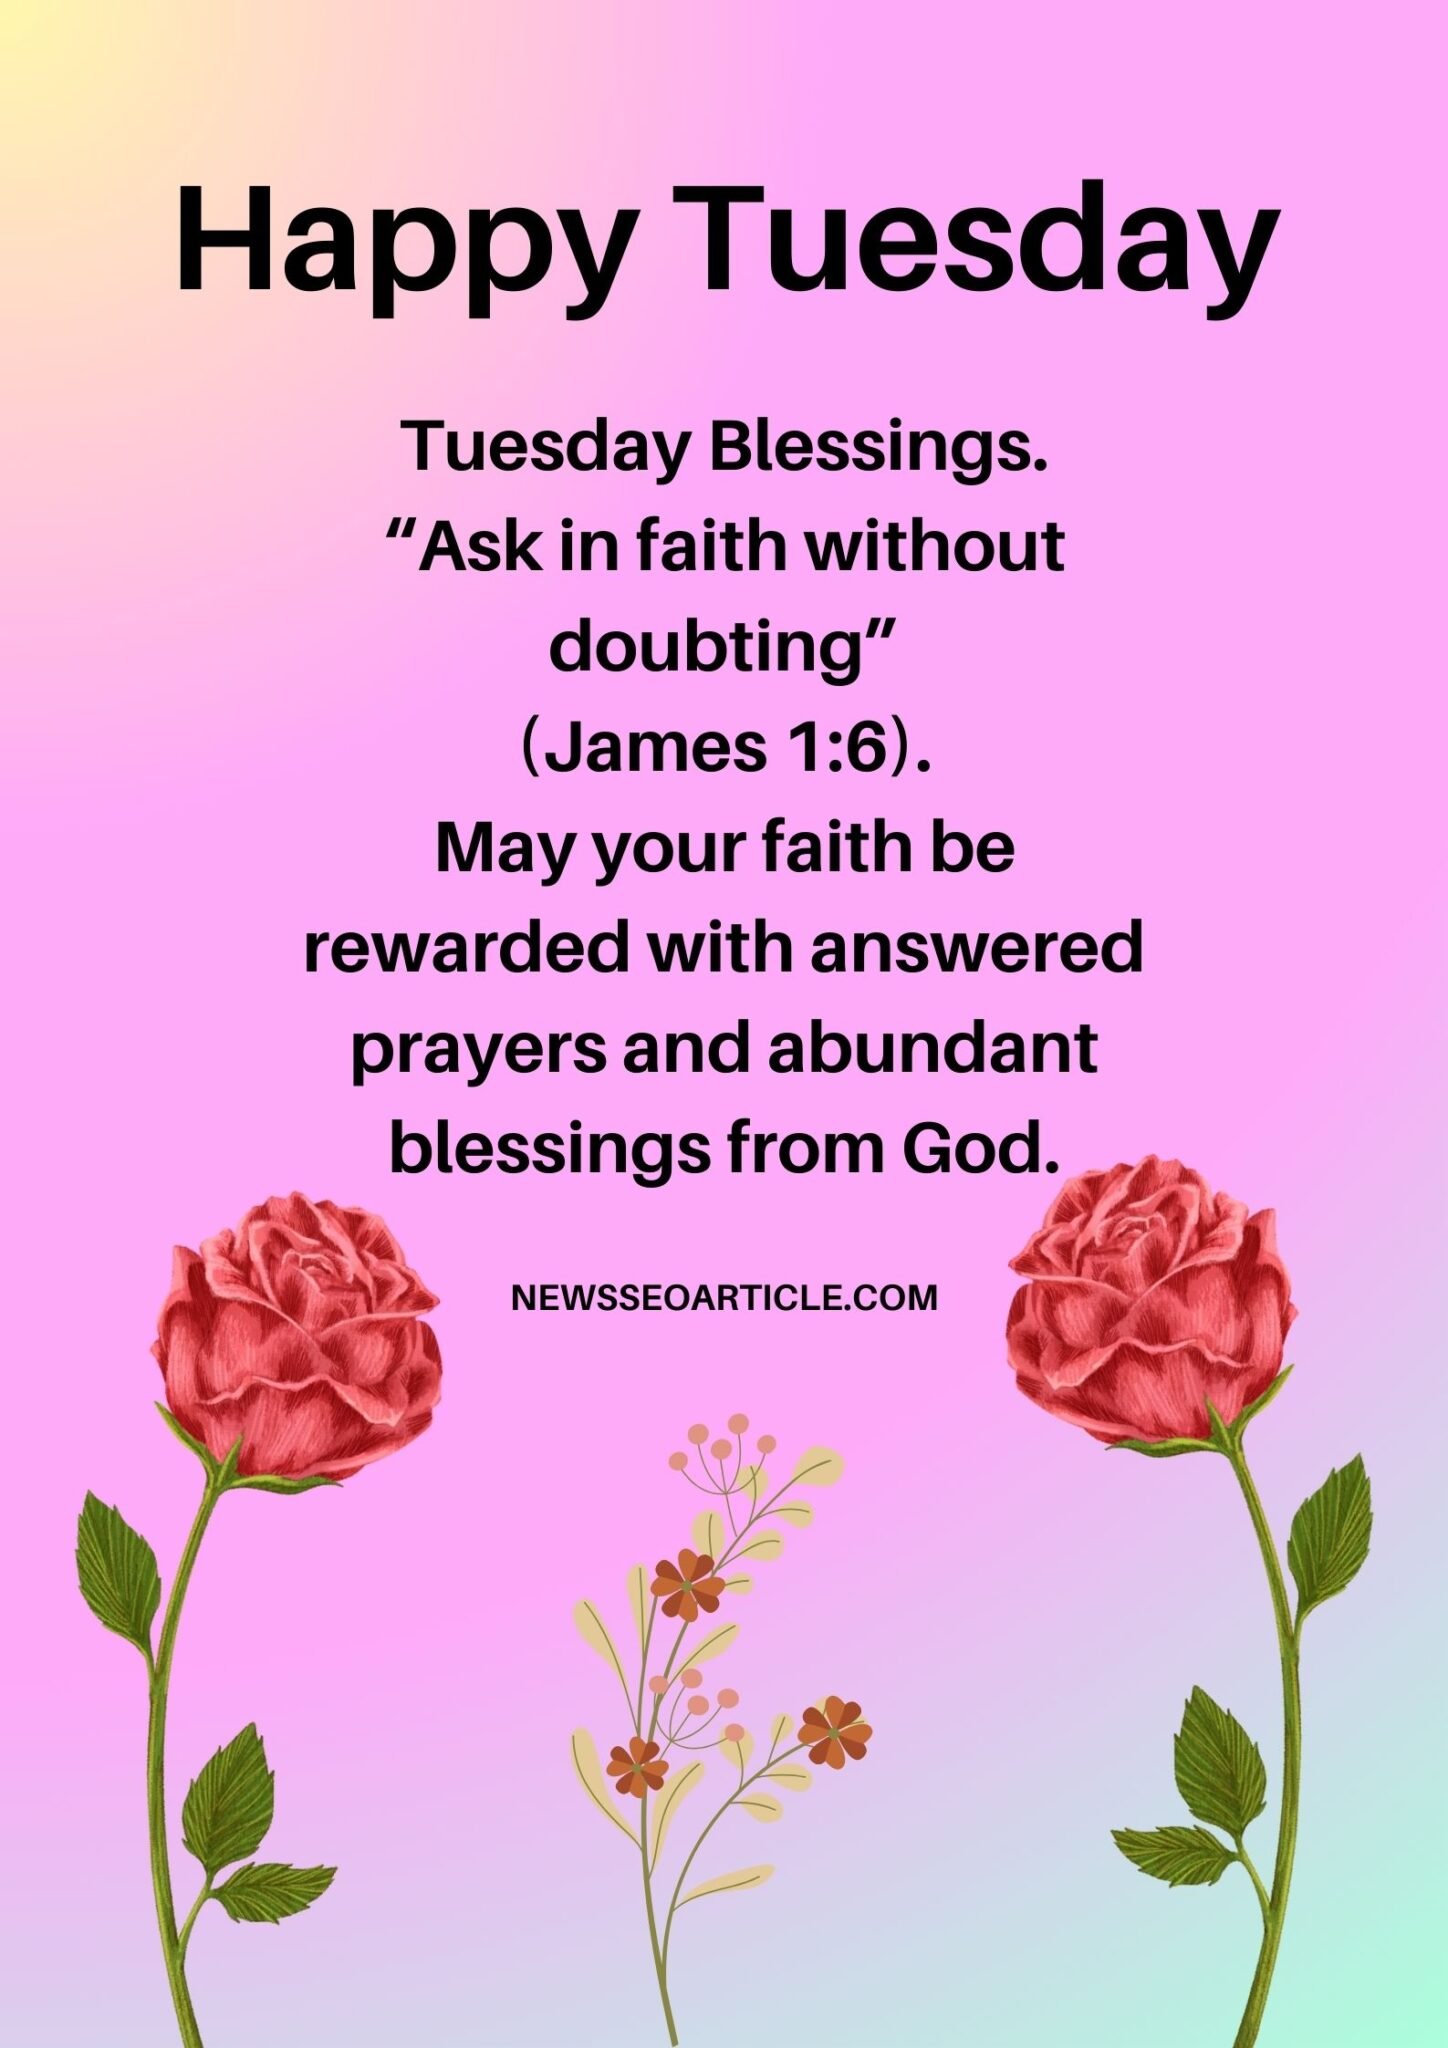 100 Best Tuesday Morning Blessings Images And Quotes | News Seo Article